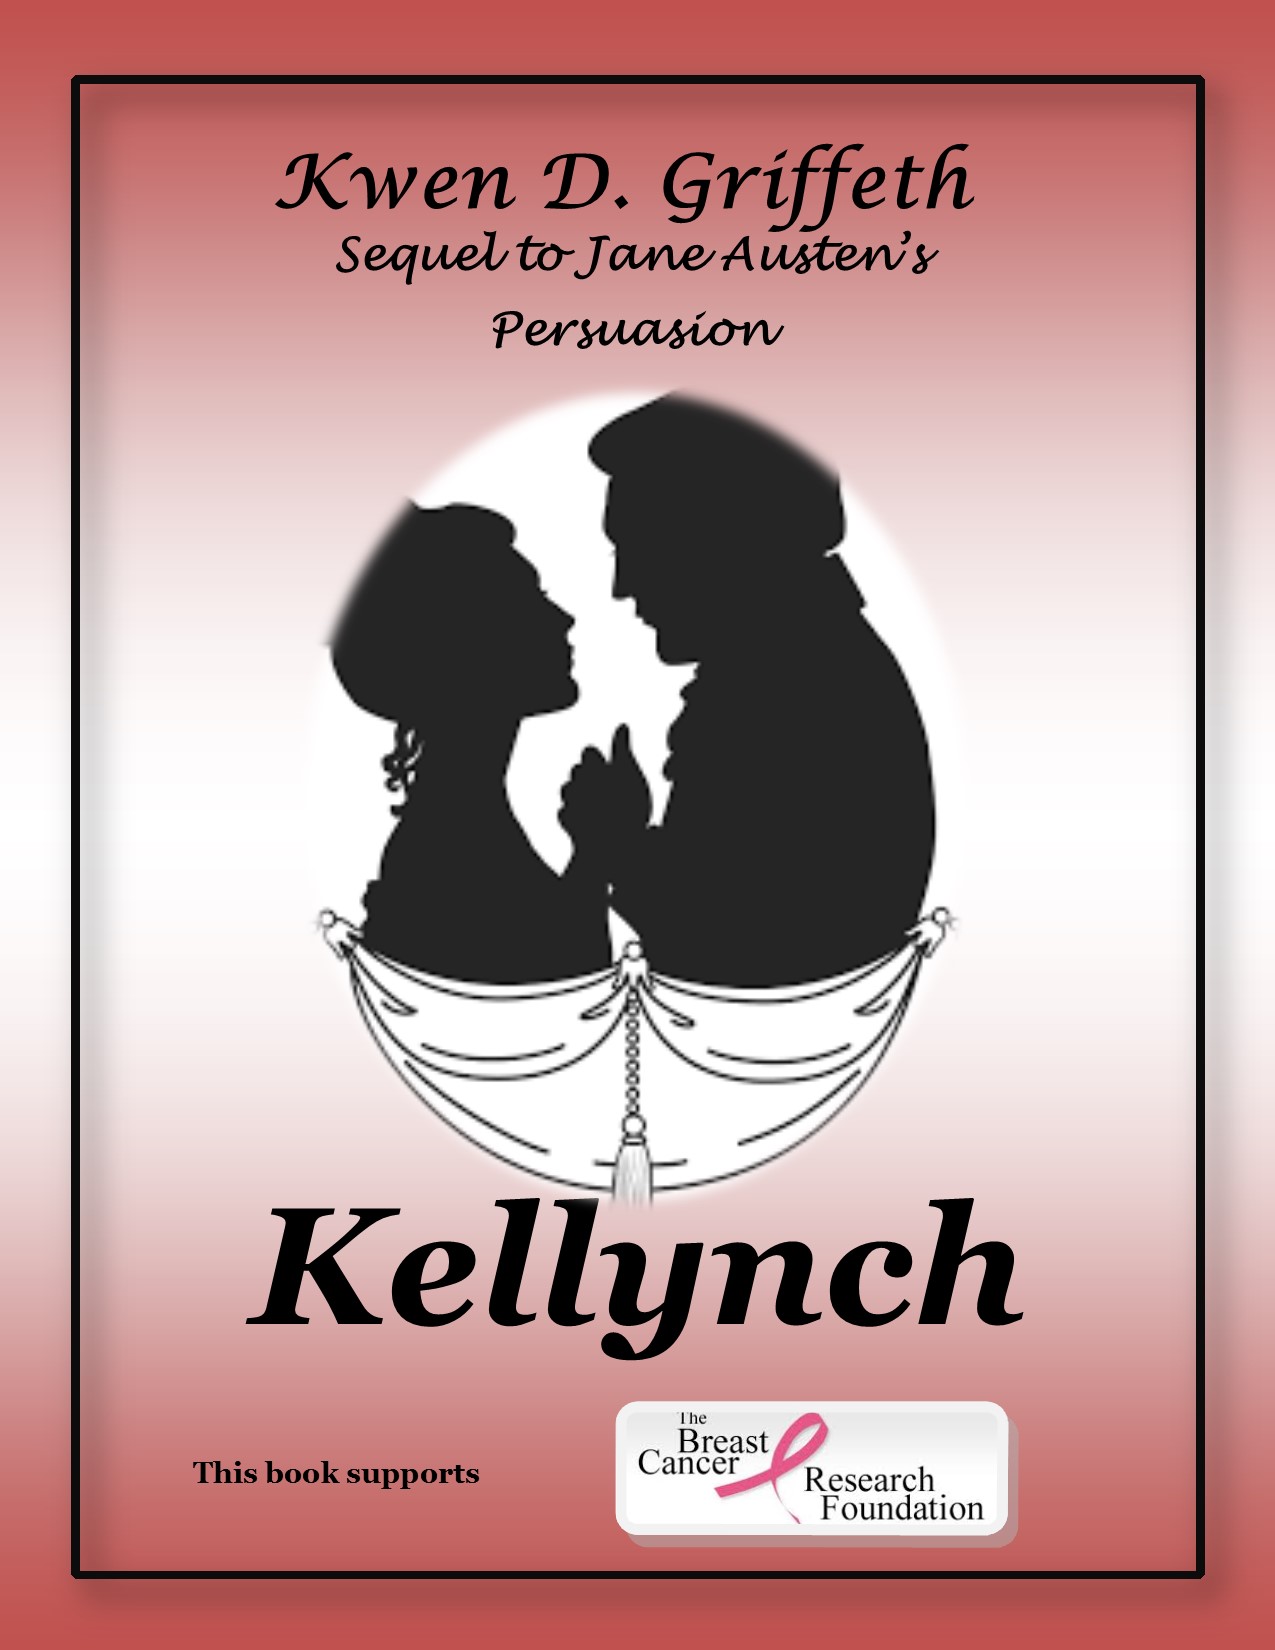 Book Tour: Kellynch by Kwen D. Griffeth